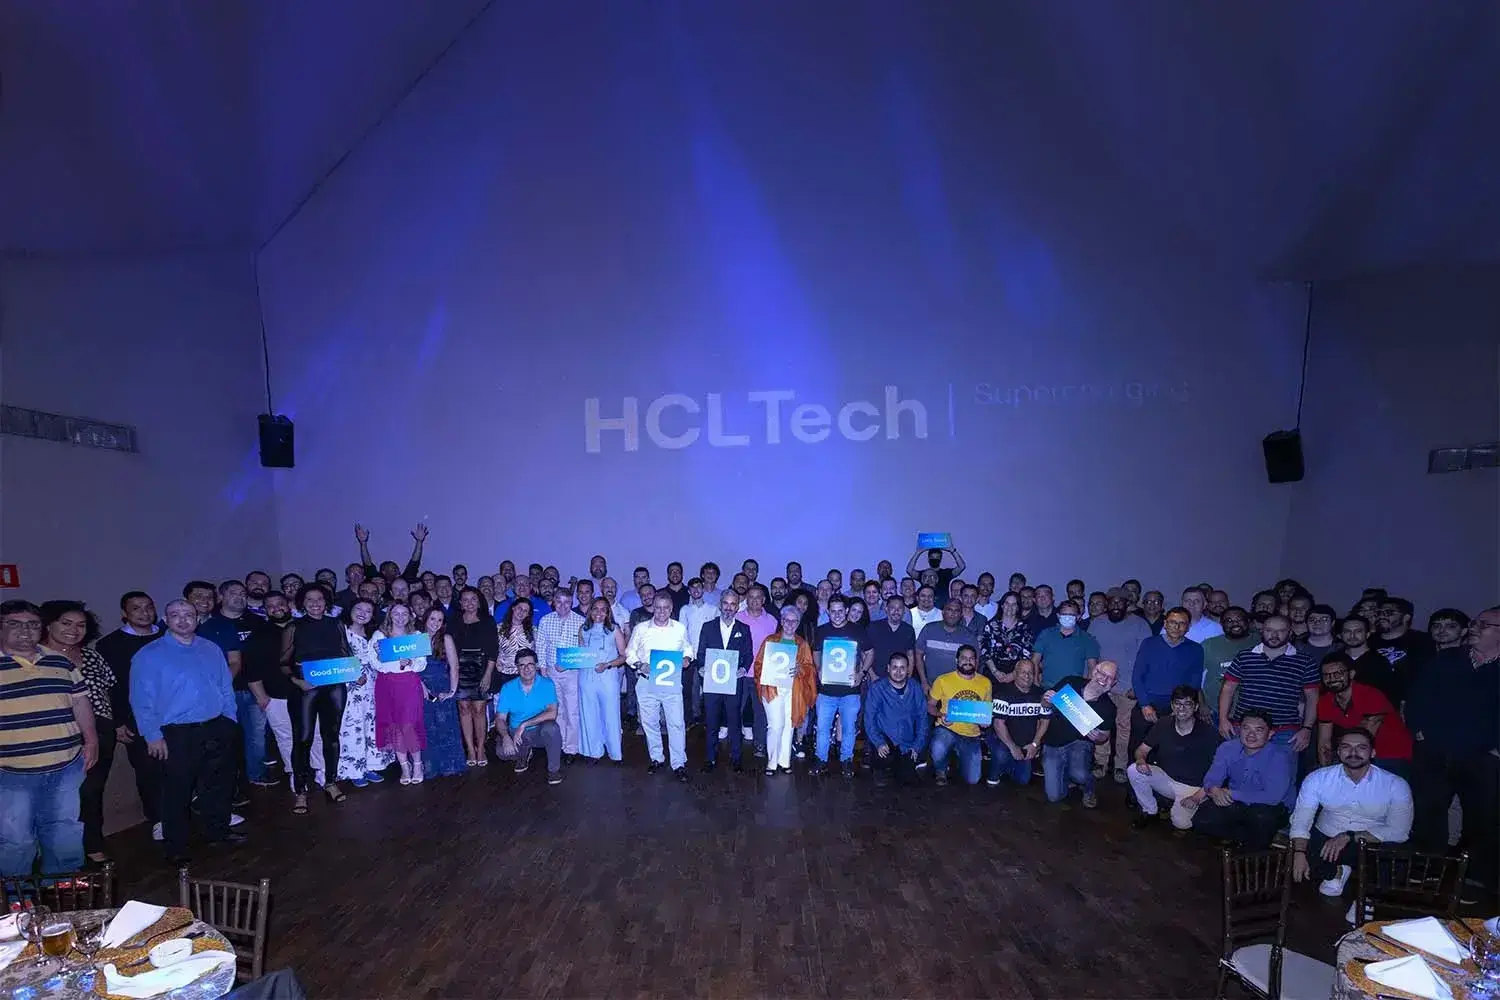 Year-end celebration with HCLTech team in São Paulo